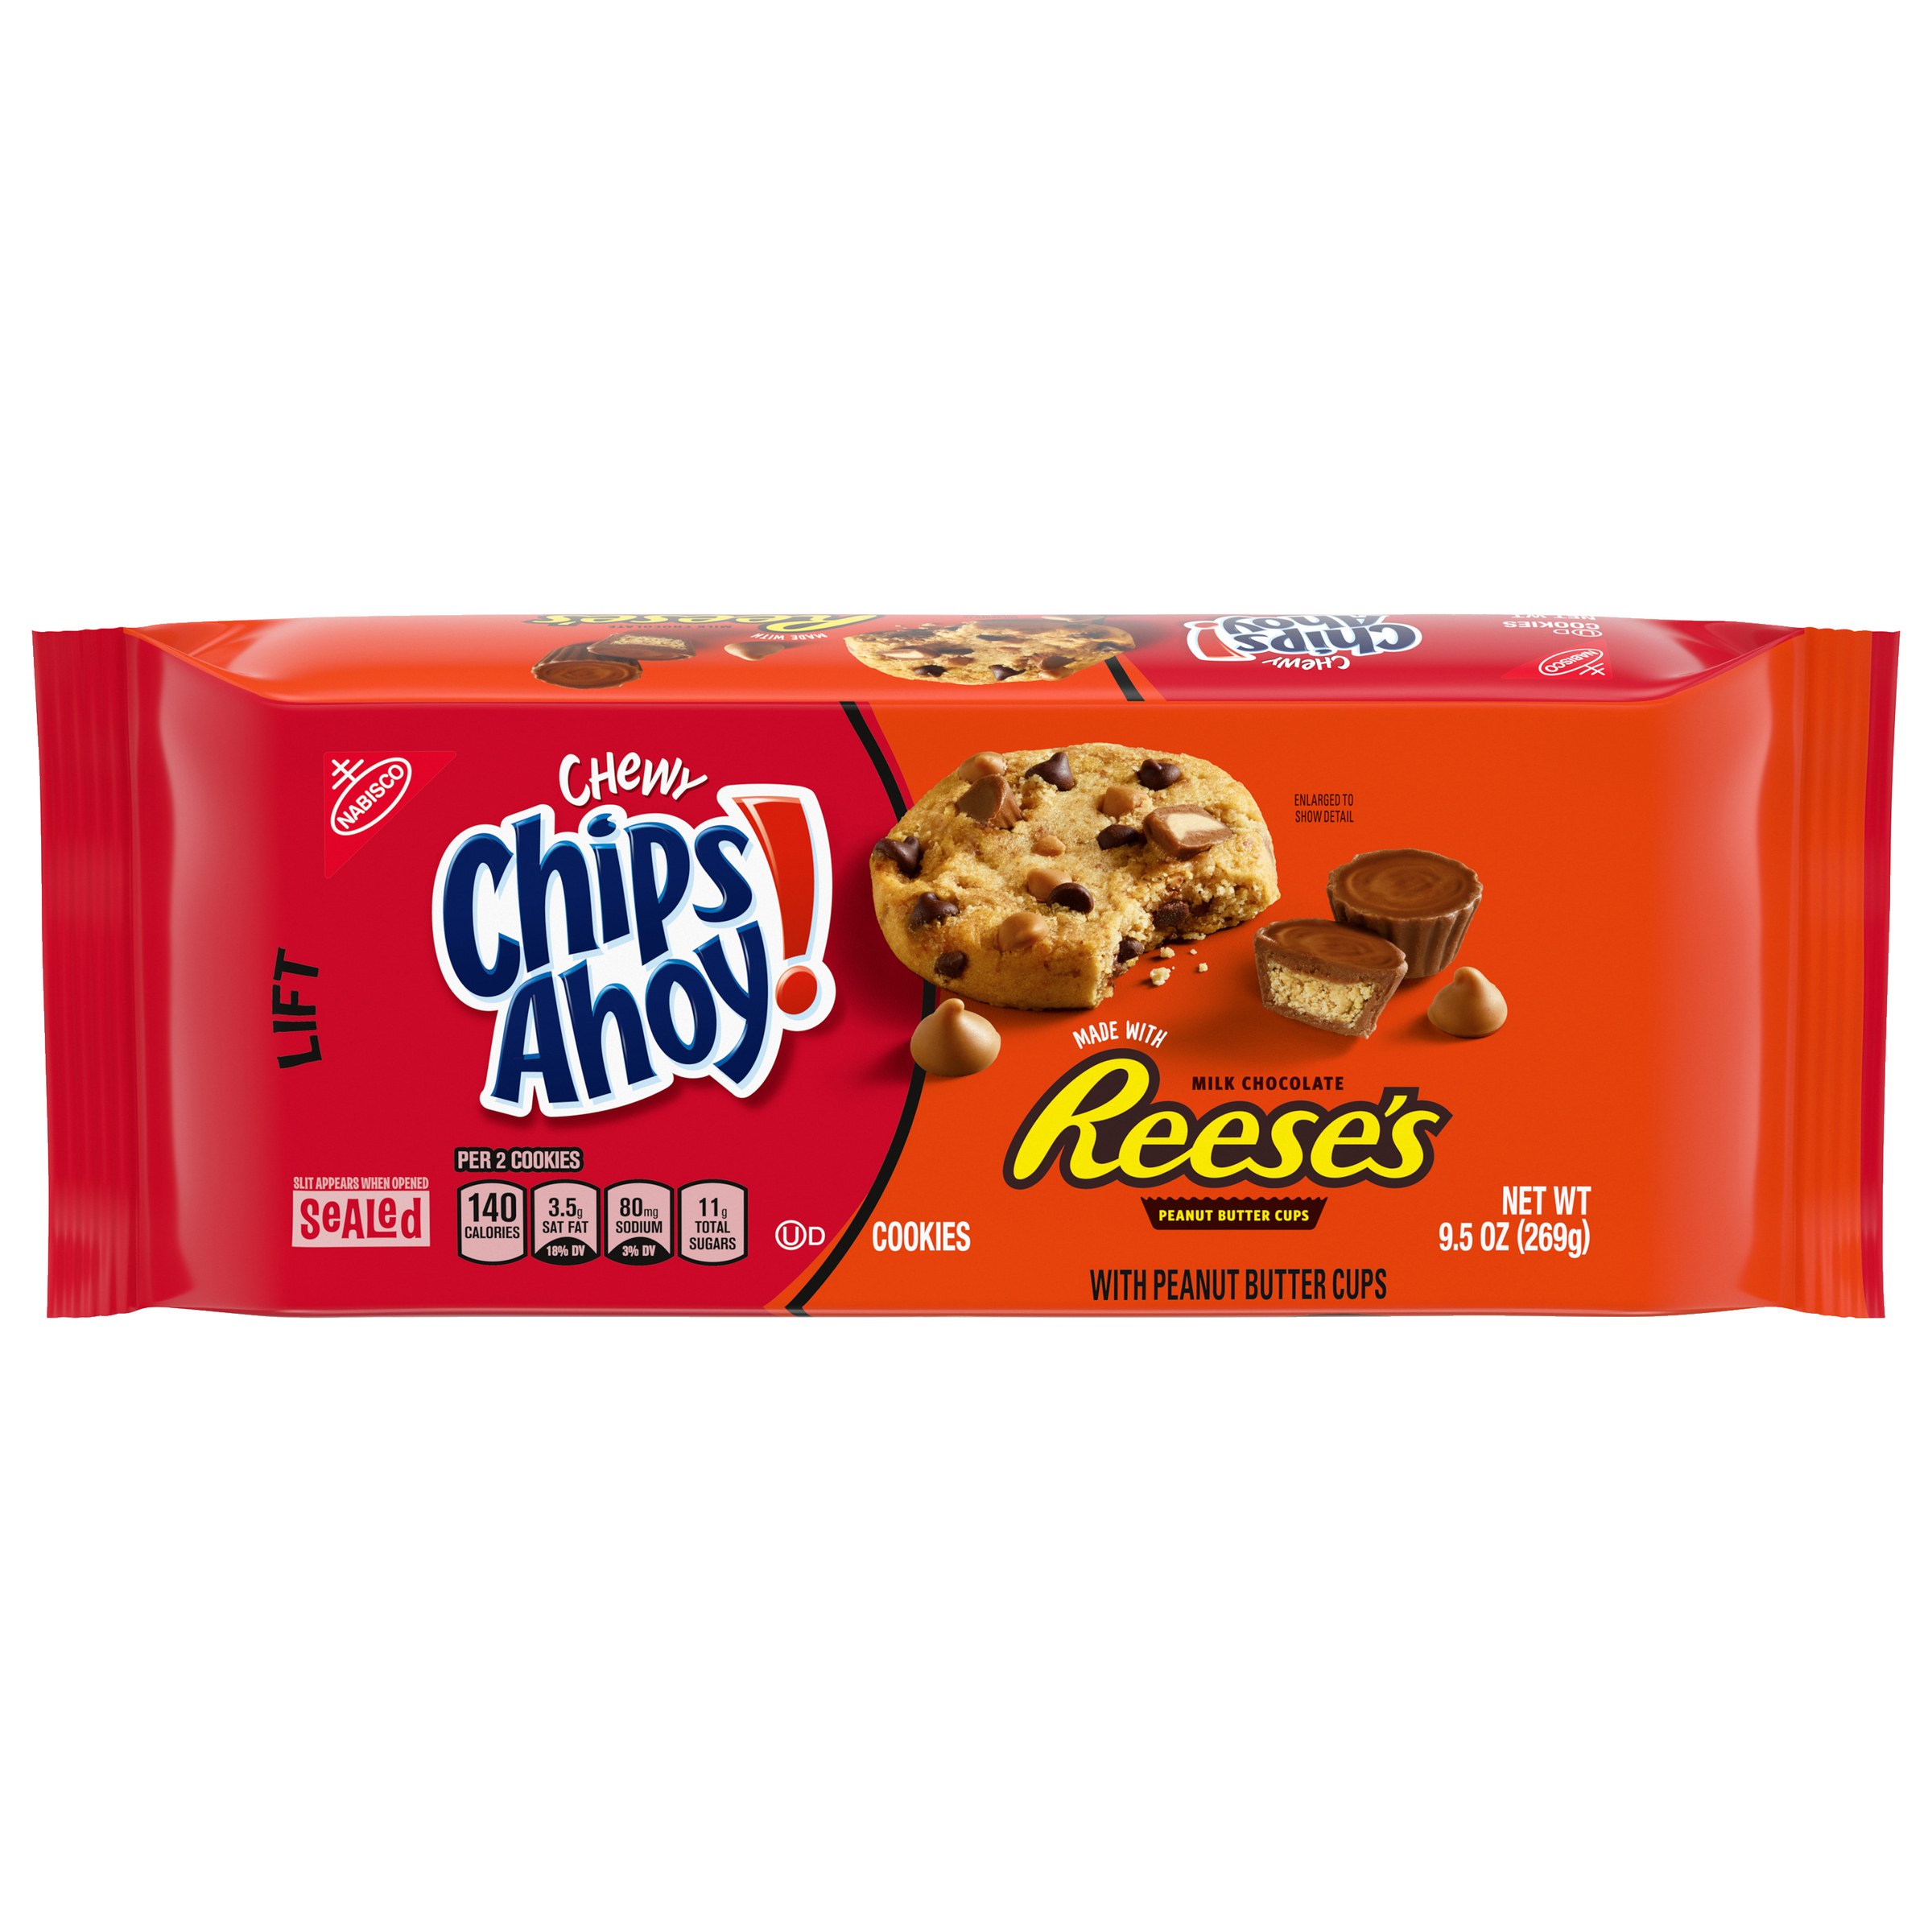 CHIPS AHOY! Chewy Chewy Cookies 9.5 oz